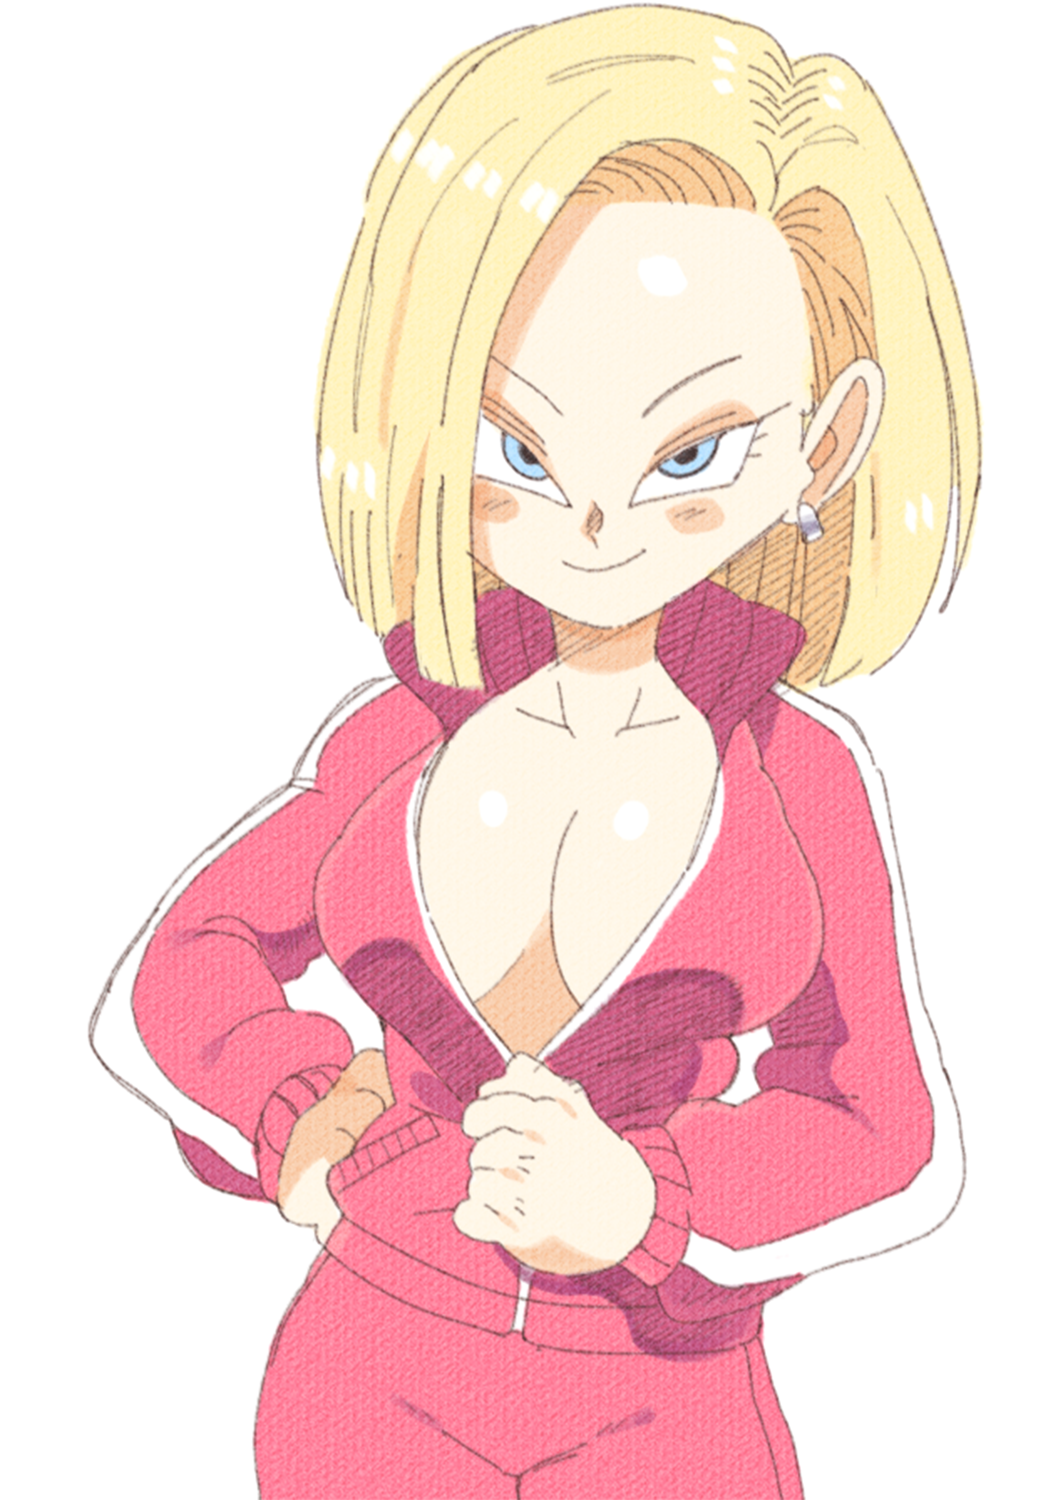 Blondies: Android 18 